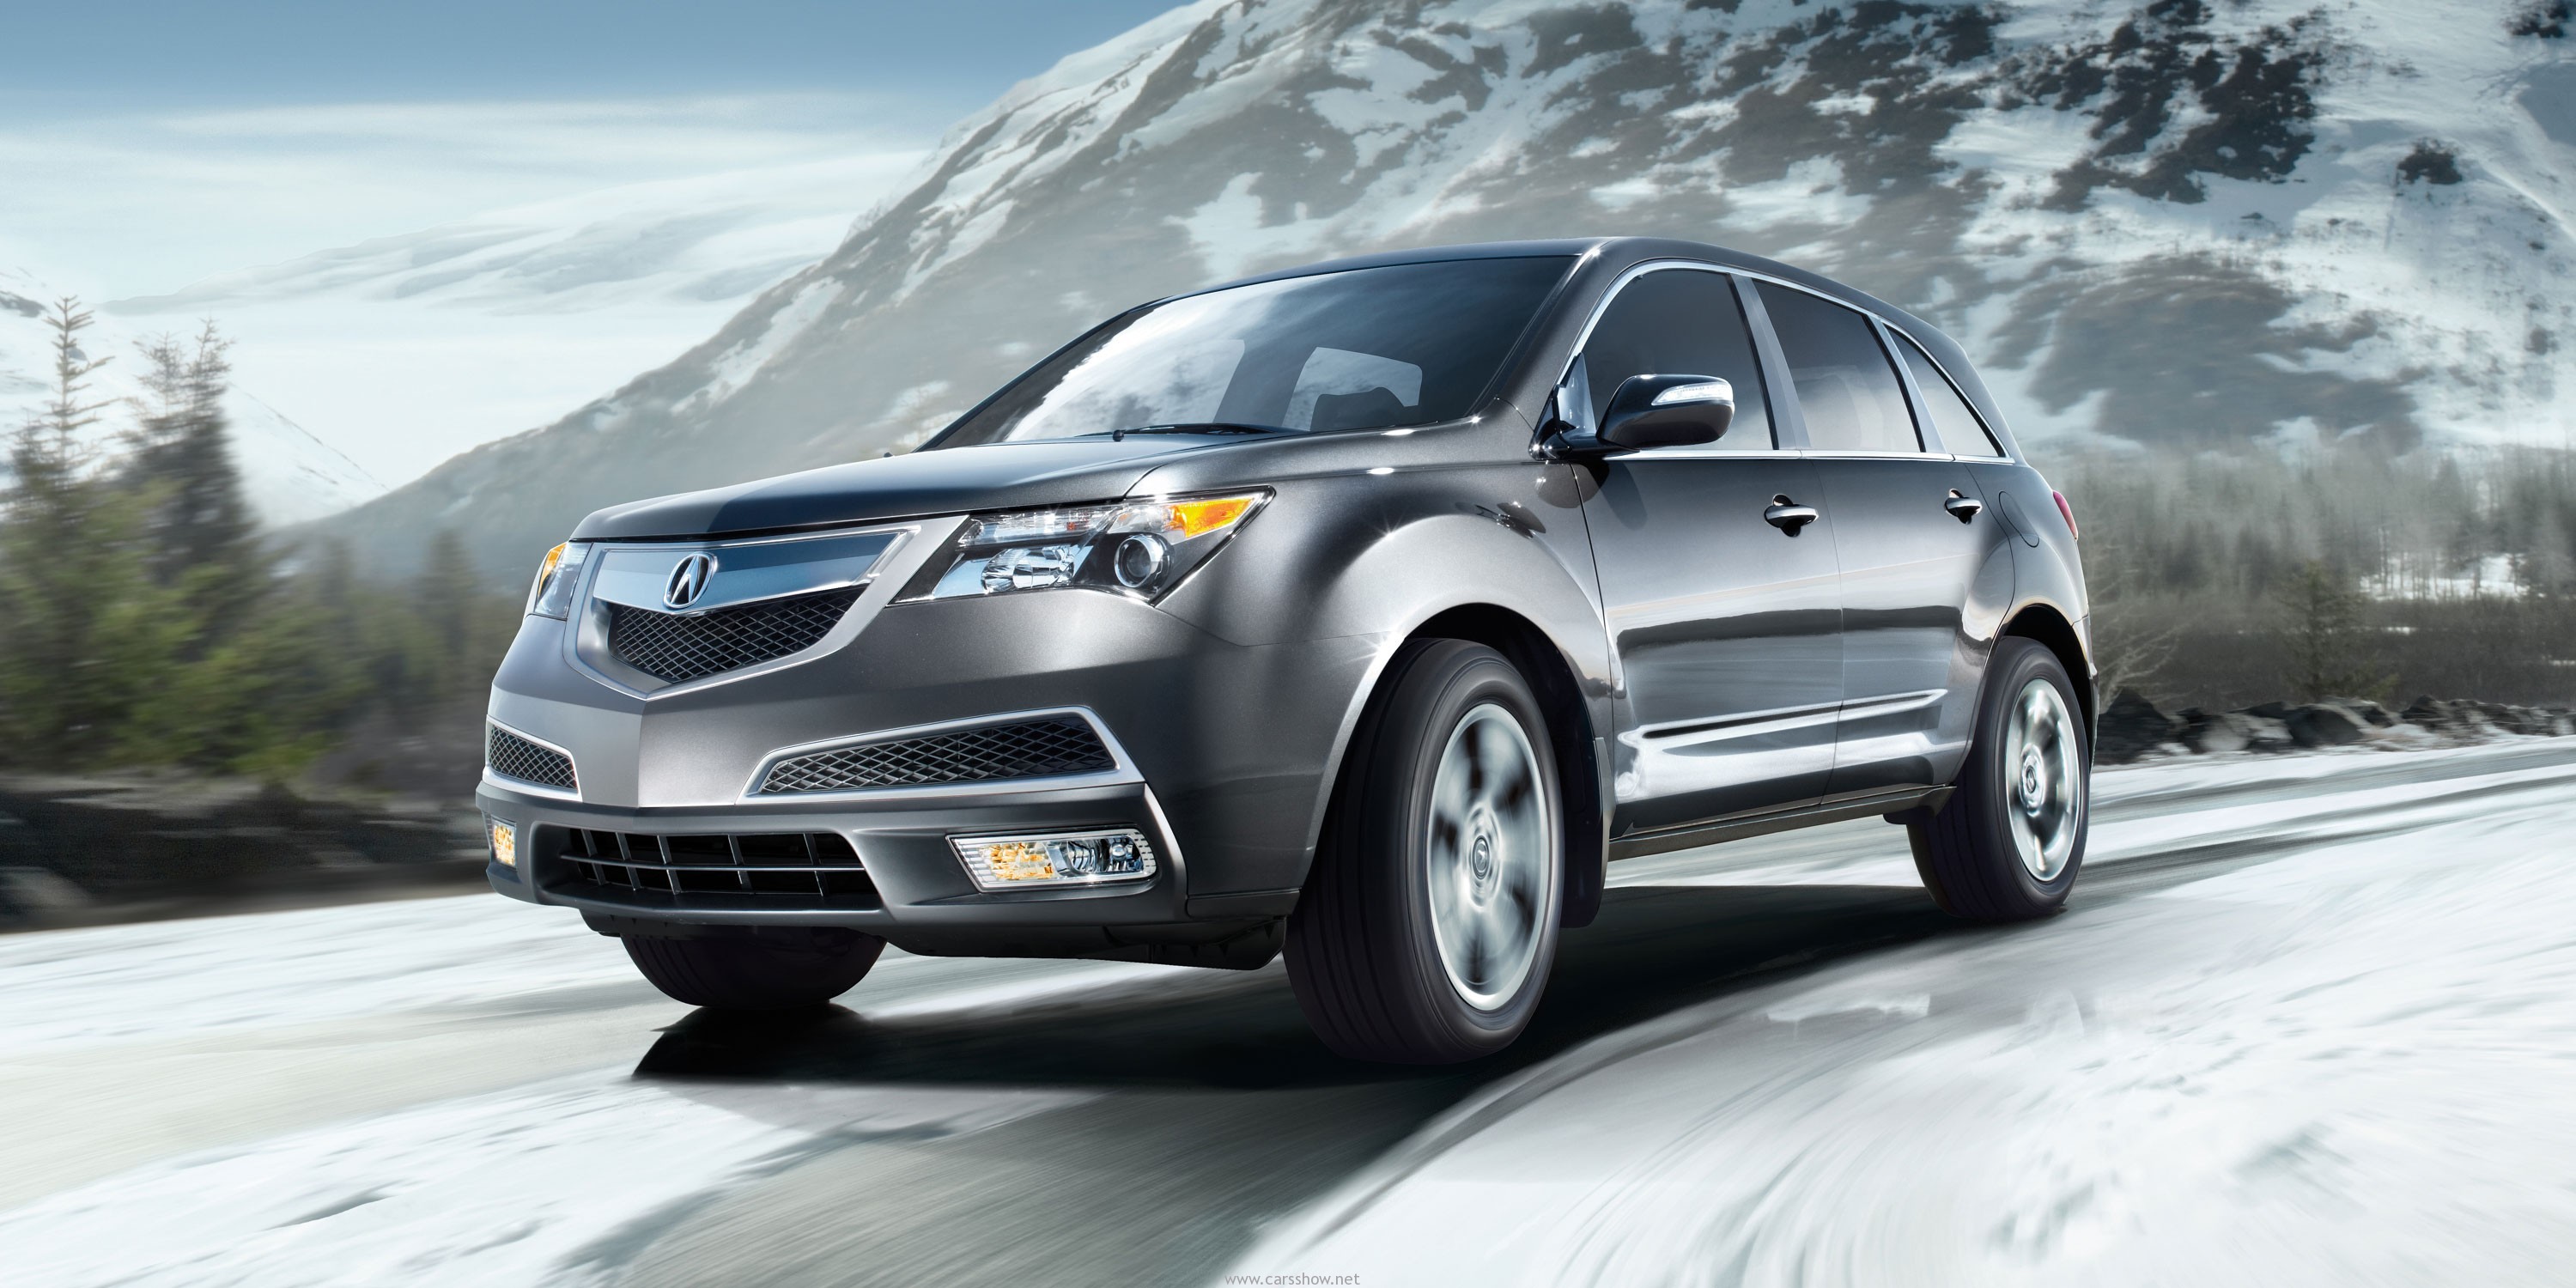 Acura Mdx 2000- Present Motorpedia ALL models, history and specifications